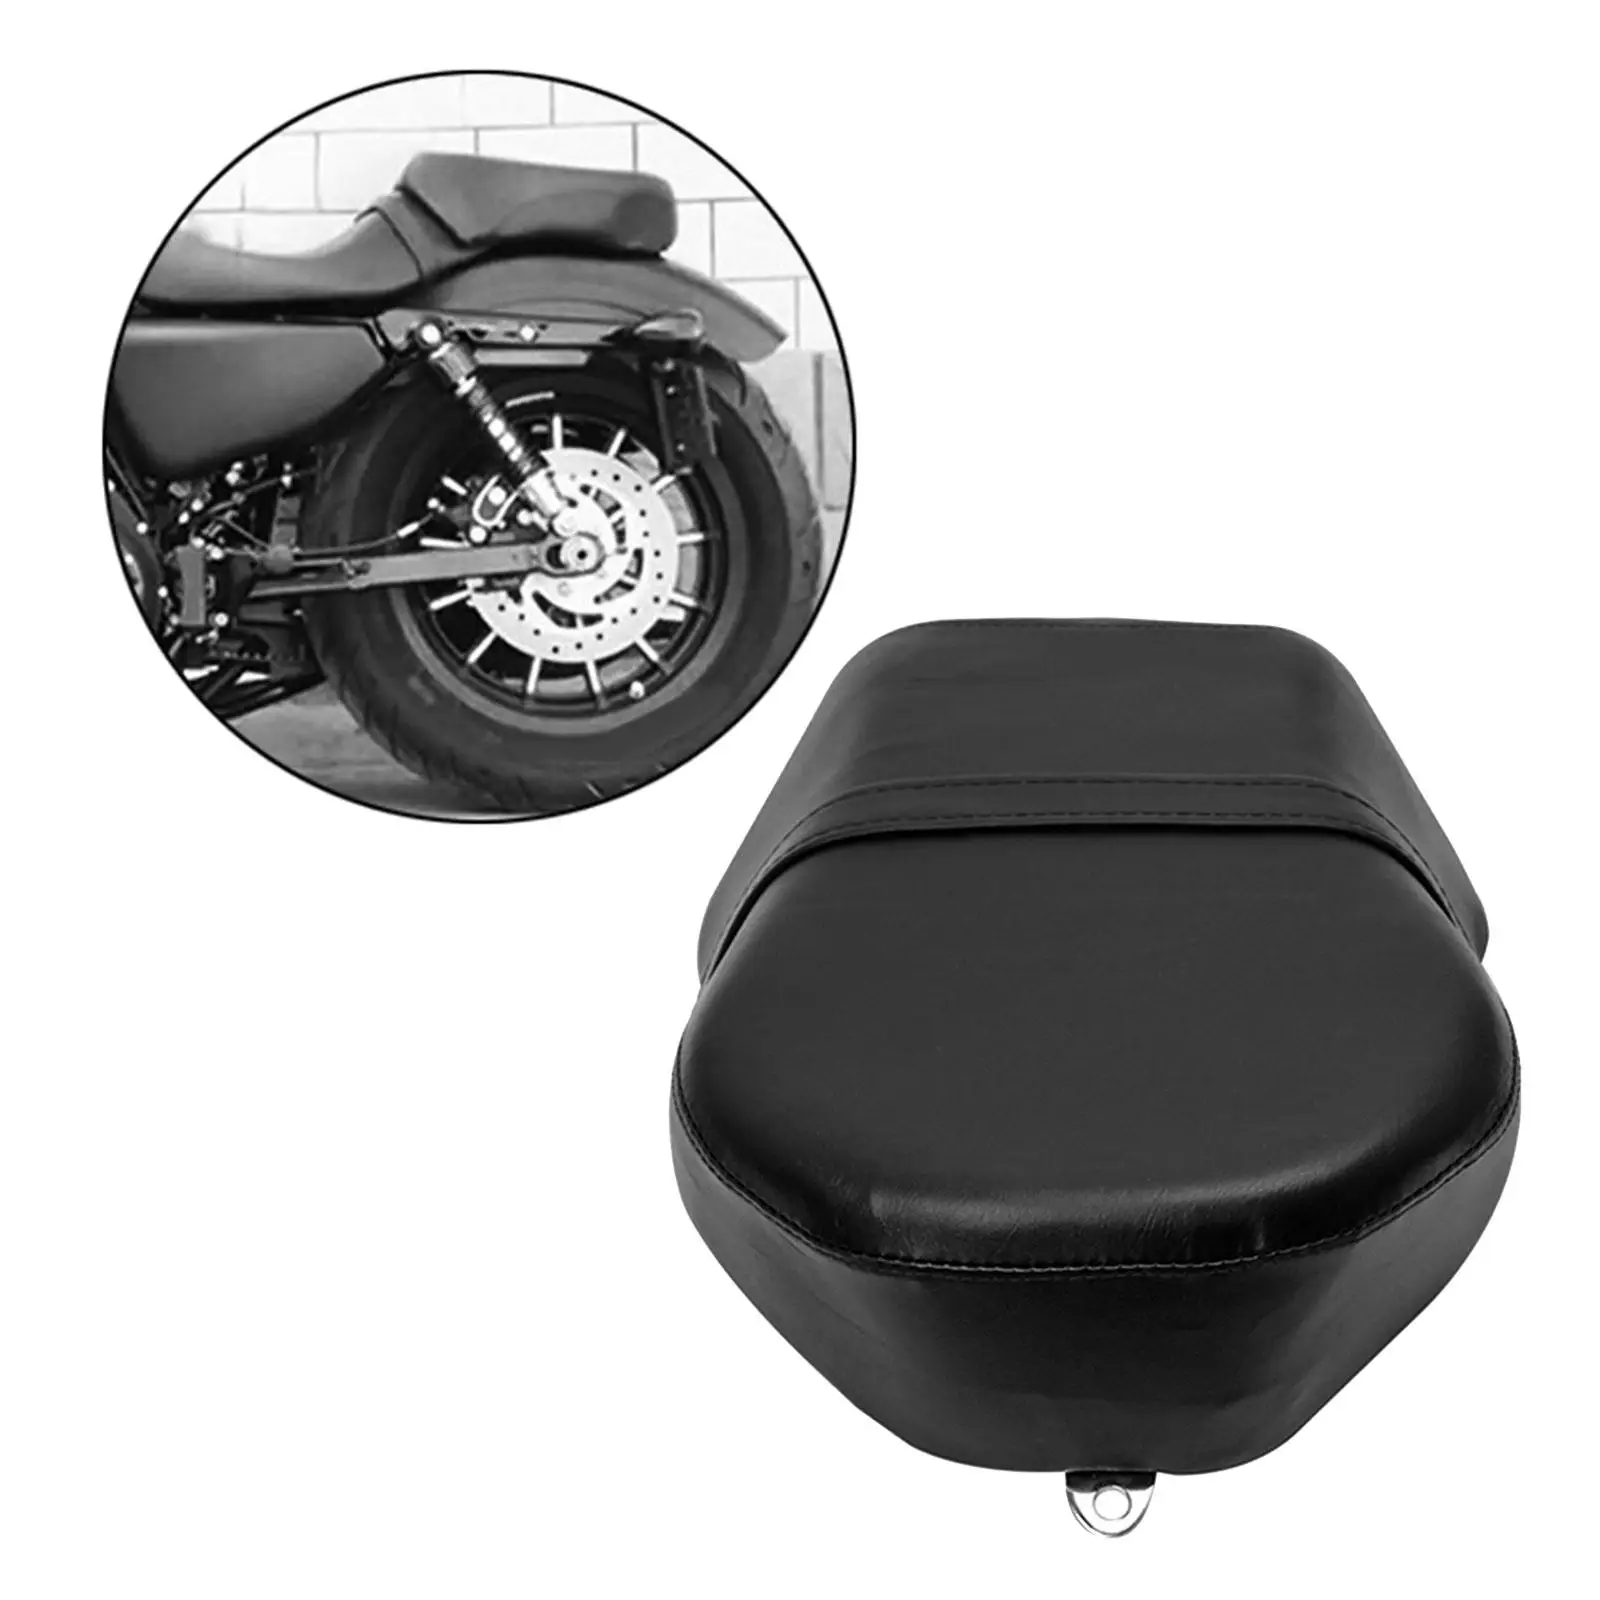 Motorcycle Pillion Passenger Pad Seat for Harley Sportster Replaces